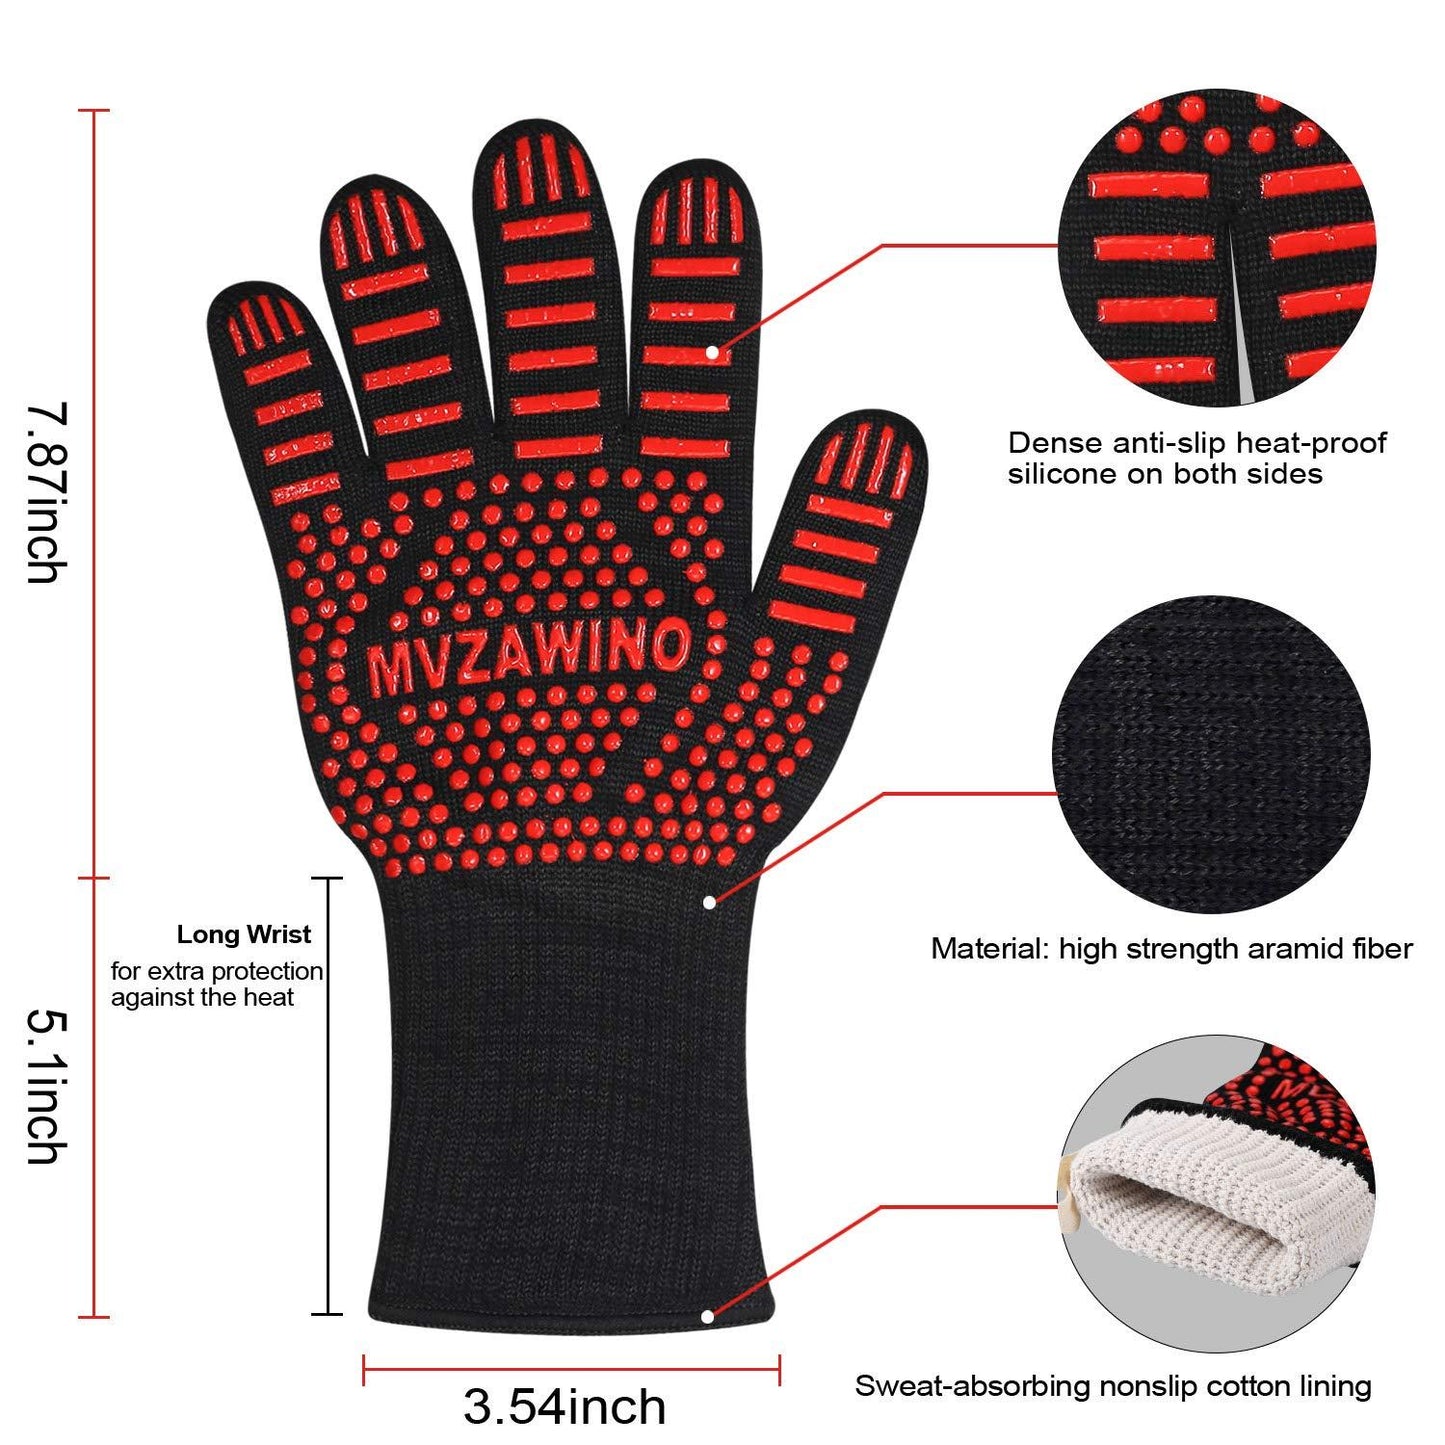 Premium BBQ Gloves, 1472°F Extreme Heat Resistant Oven Gloves, Grilling Gloves with Cut Resistant, Durable Fireproof Kitchen Oven Mitts Designed for Cooking, Grill, Frying, Baking, Barbecue-1 Pair - CookCave